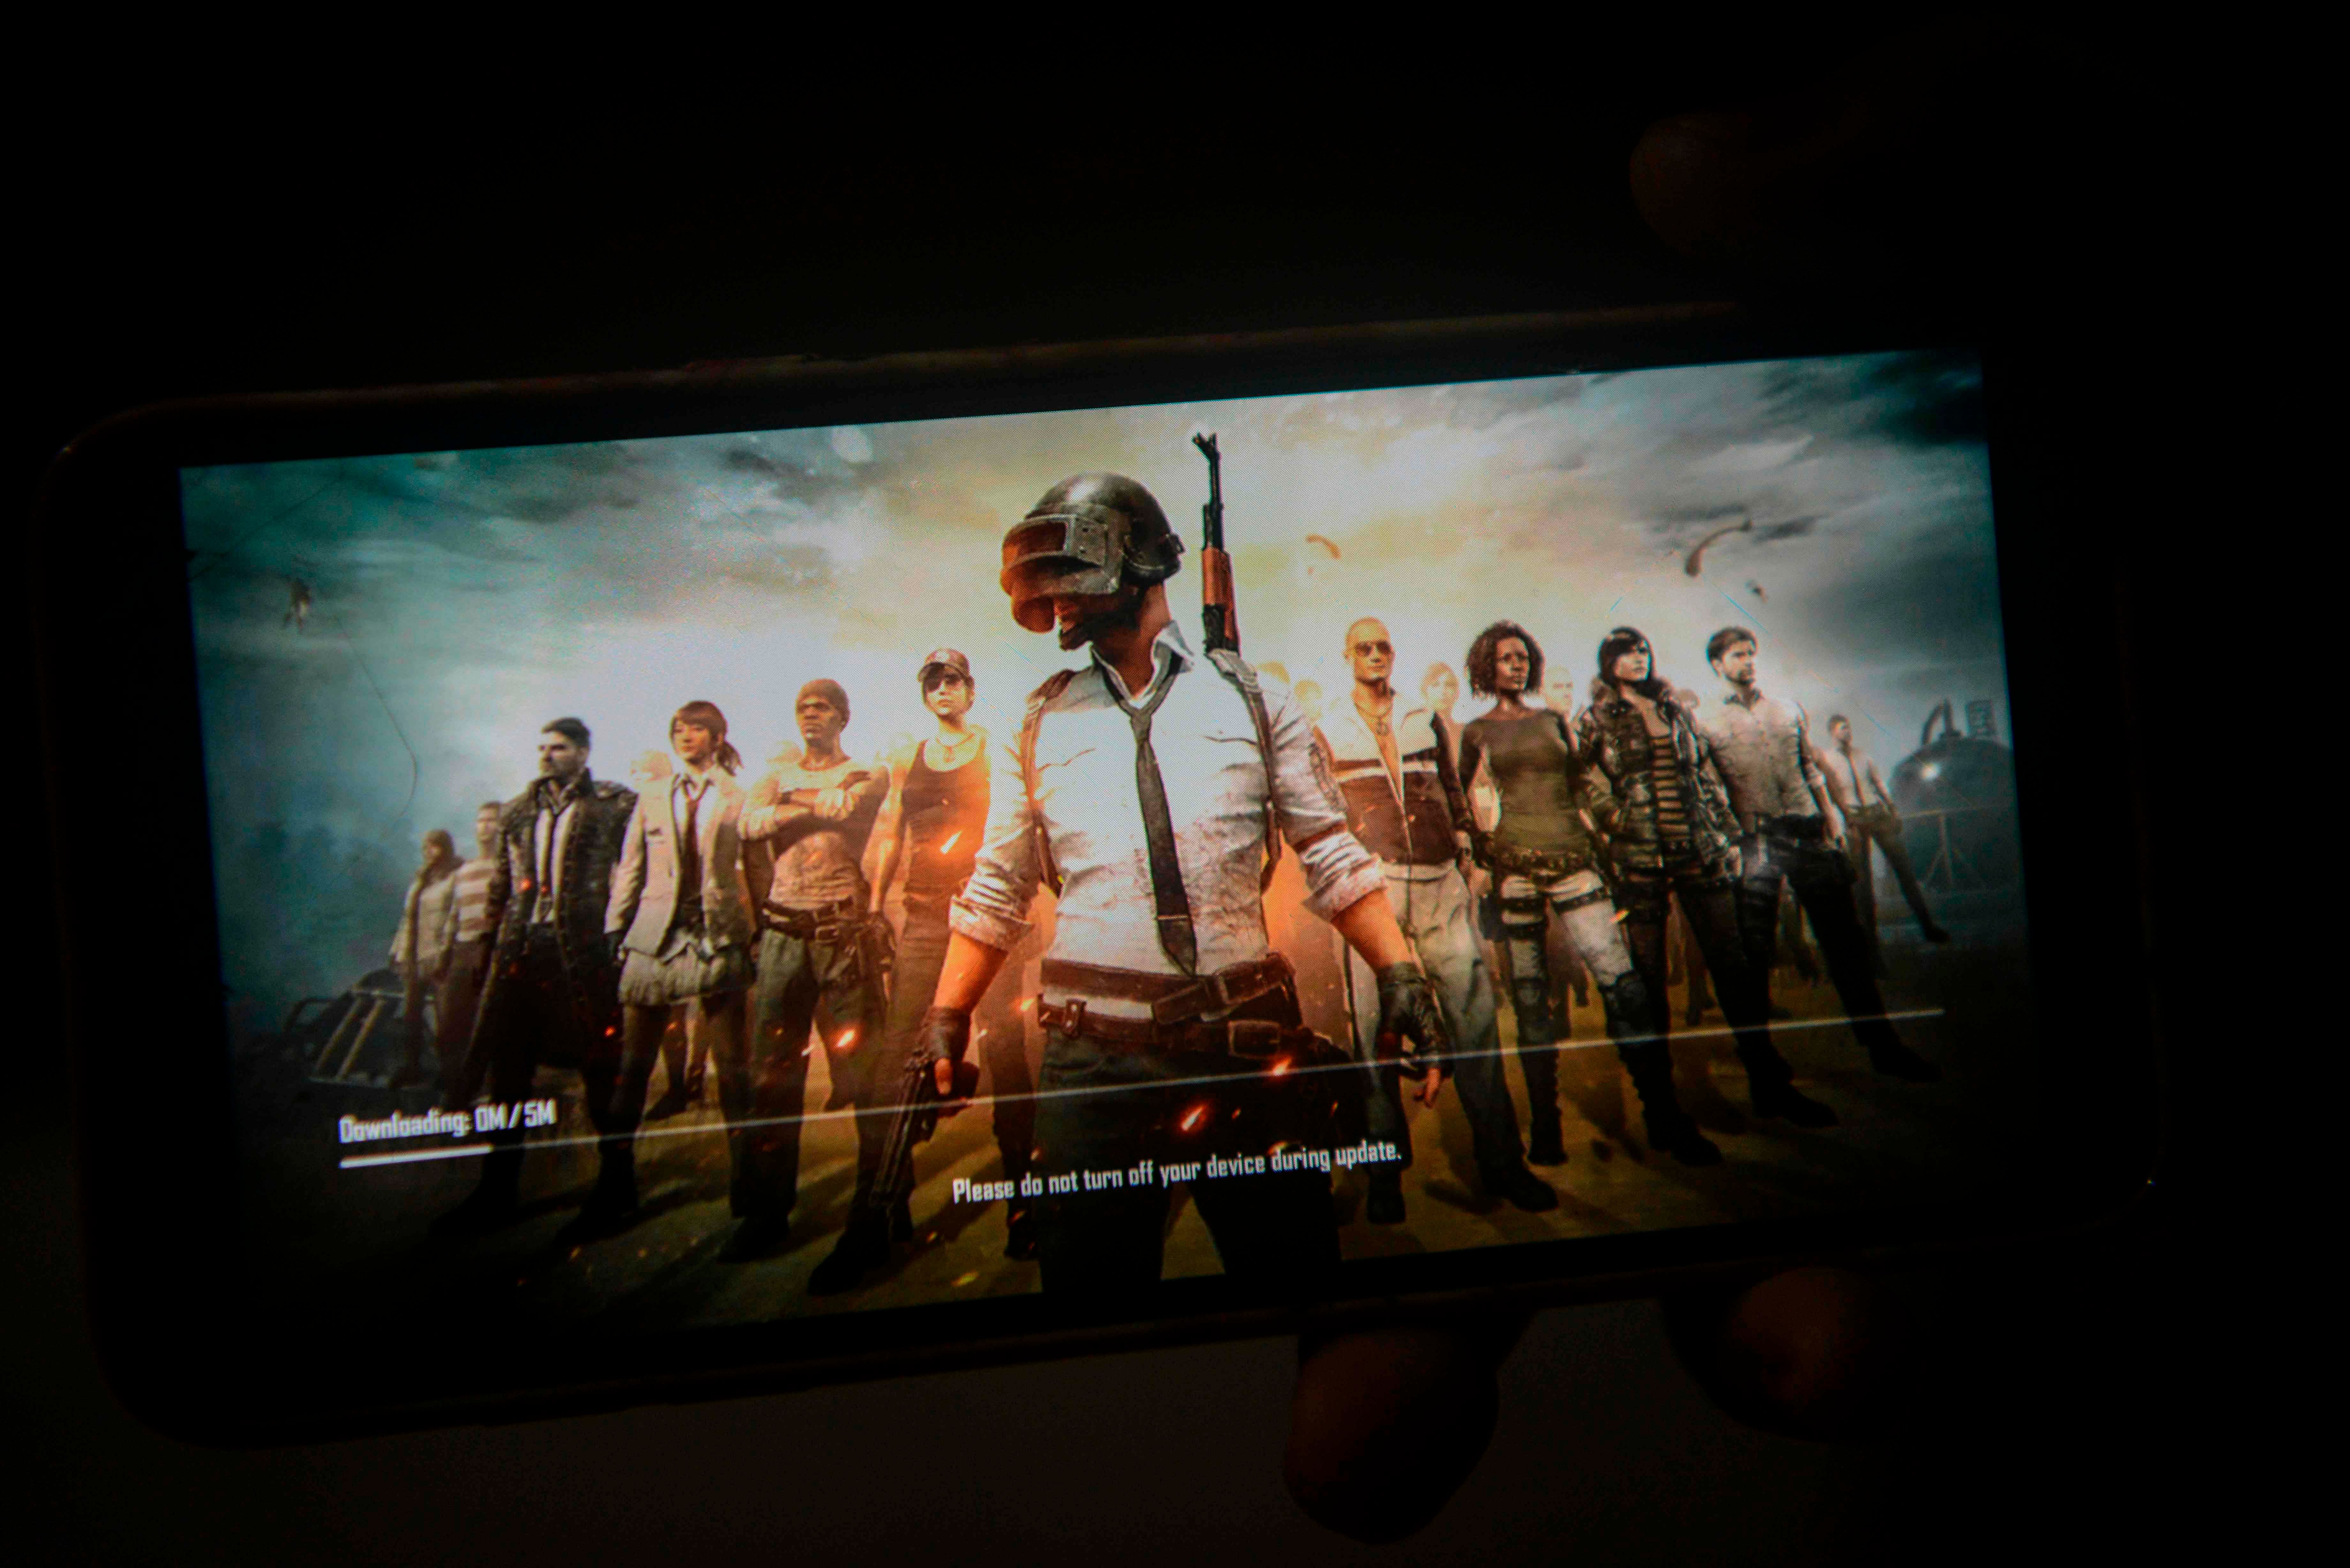 PUBG was among over 100 China-origin mobile applications banned by the government in 2020. Credit: AFP File Photo